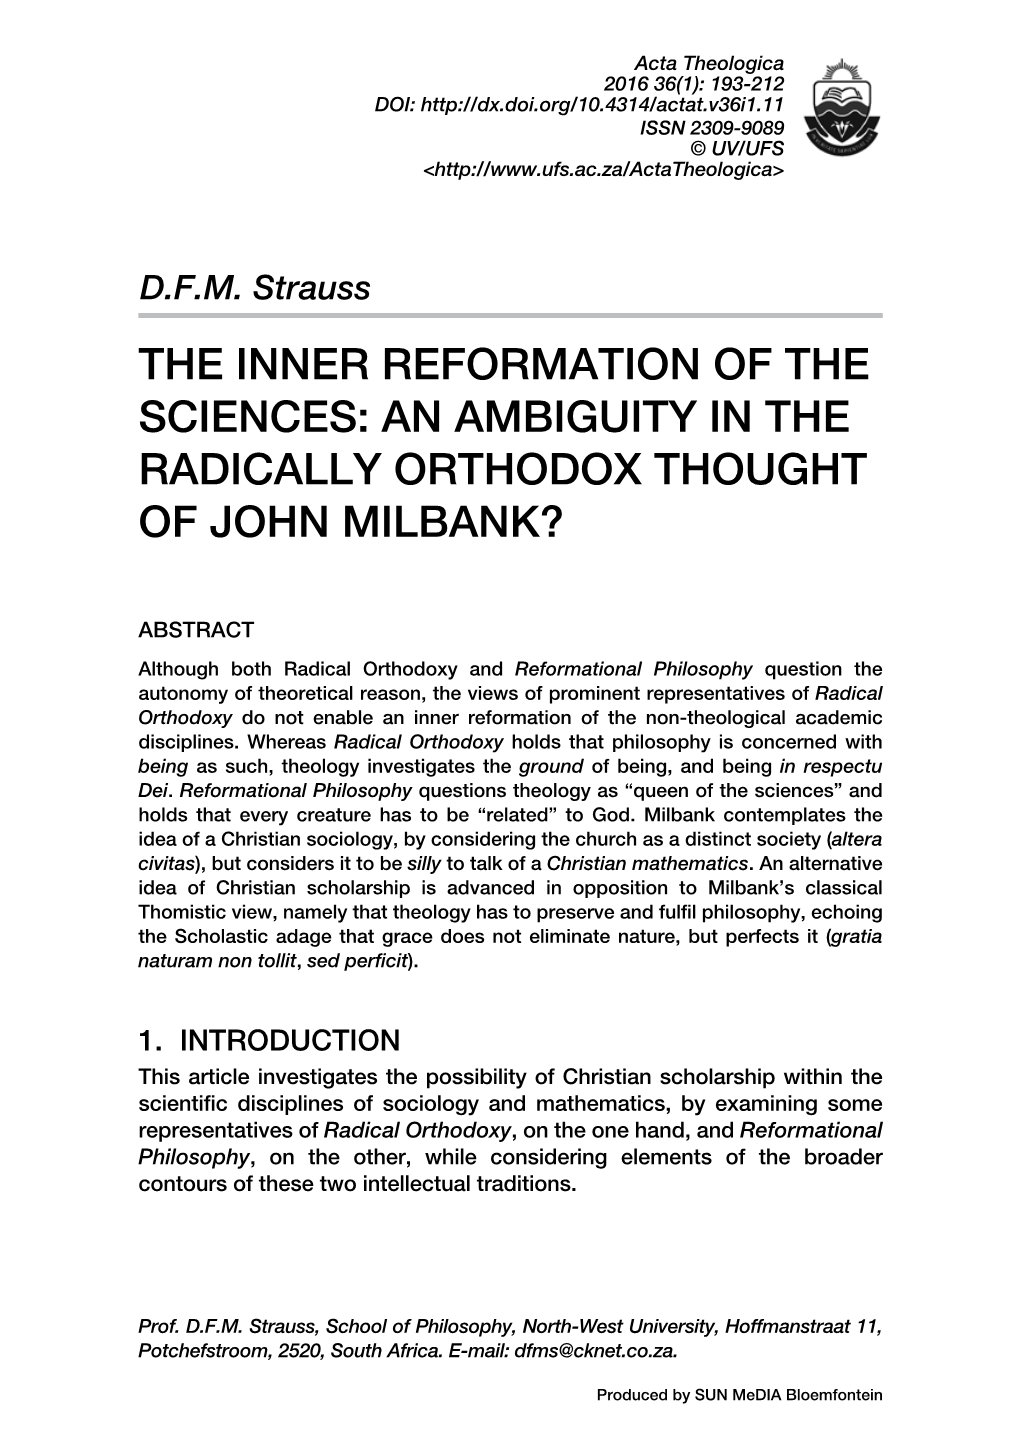 An Ambiguity in the Radically Orthodox Thought of John Milbank?